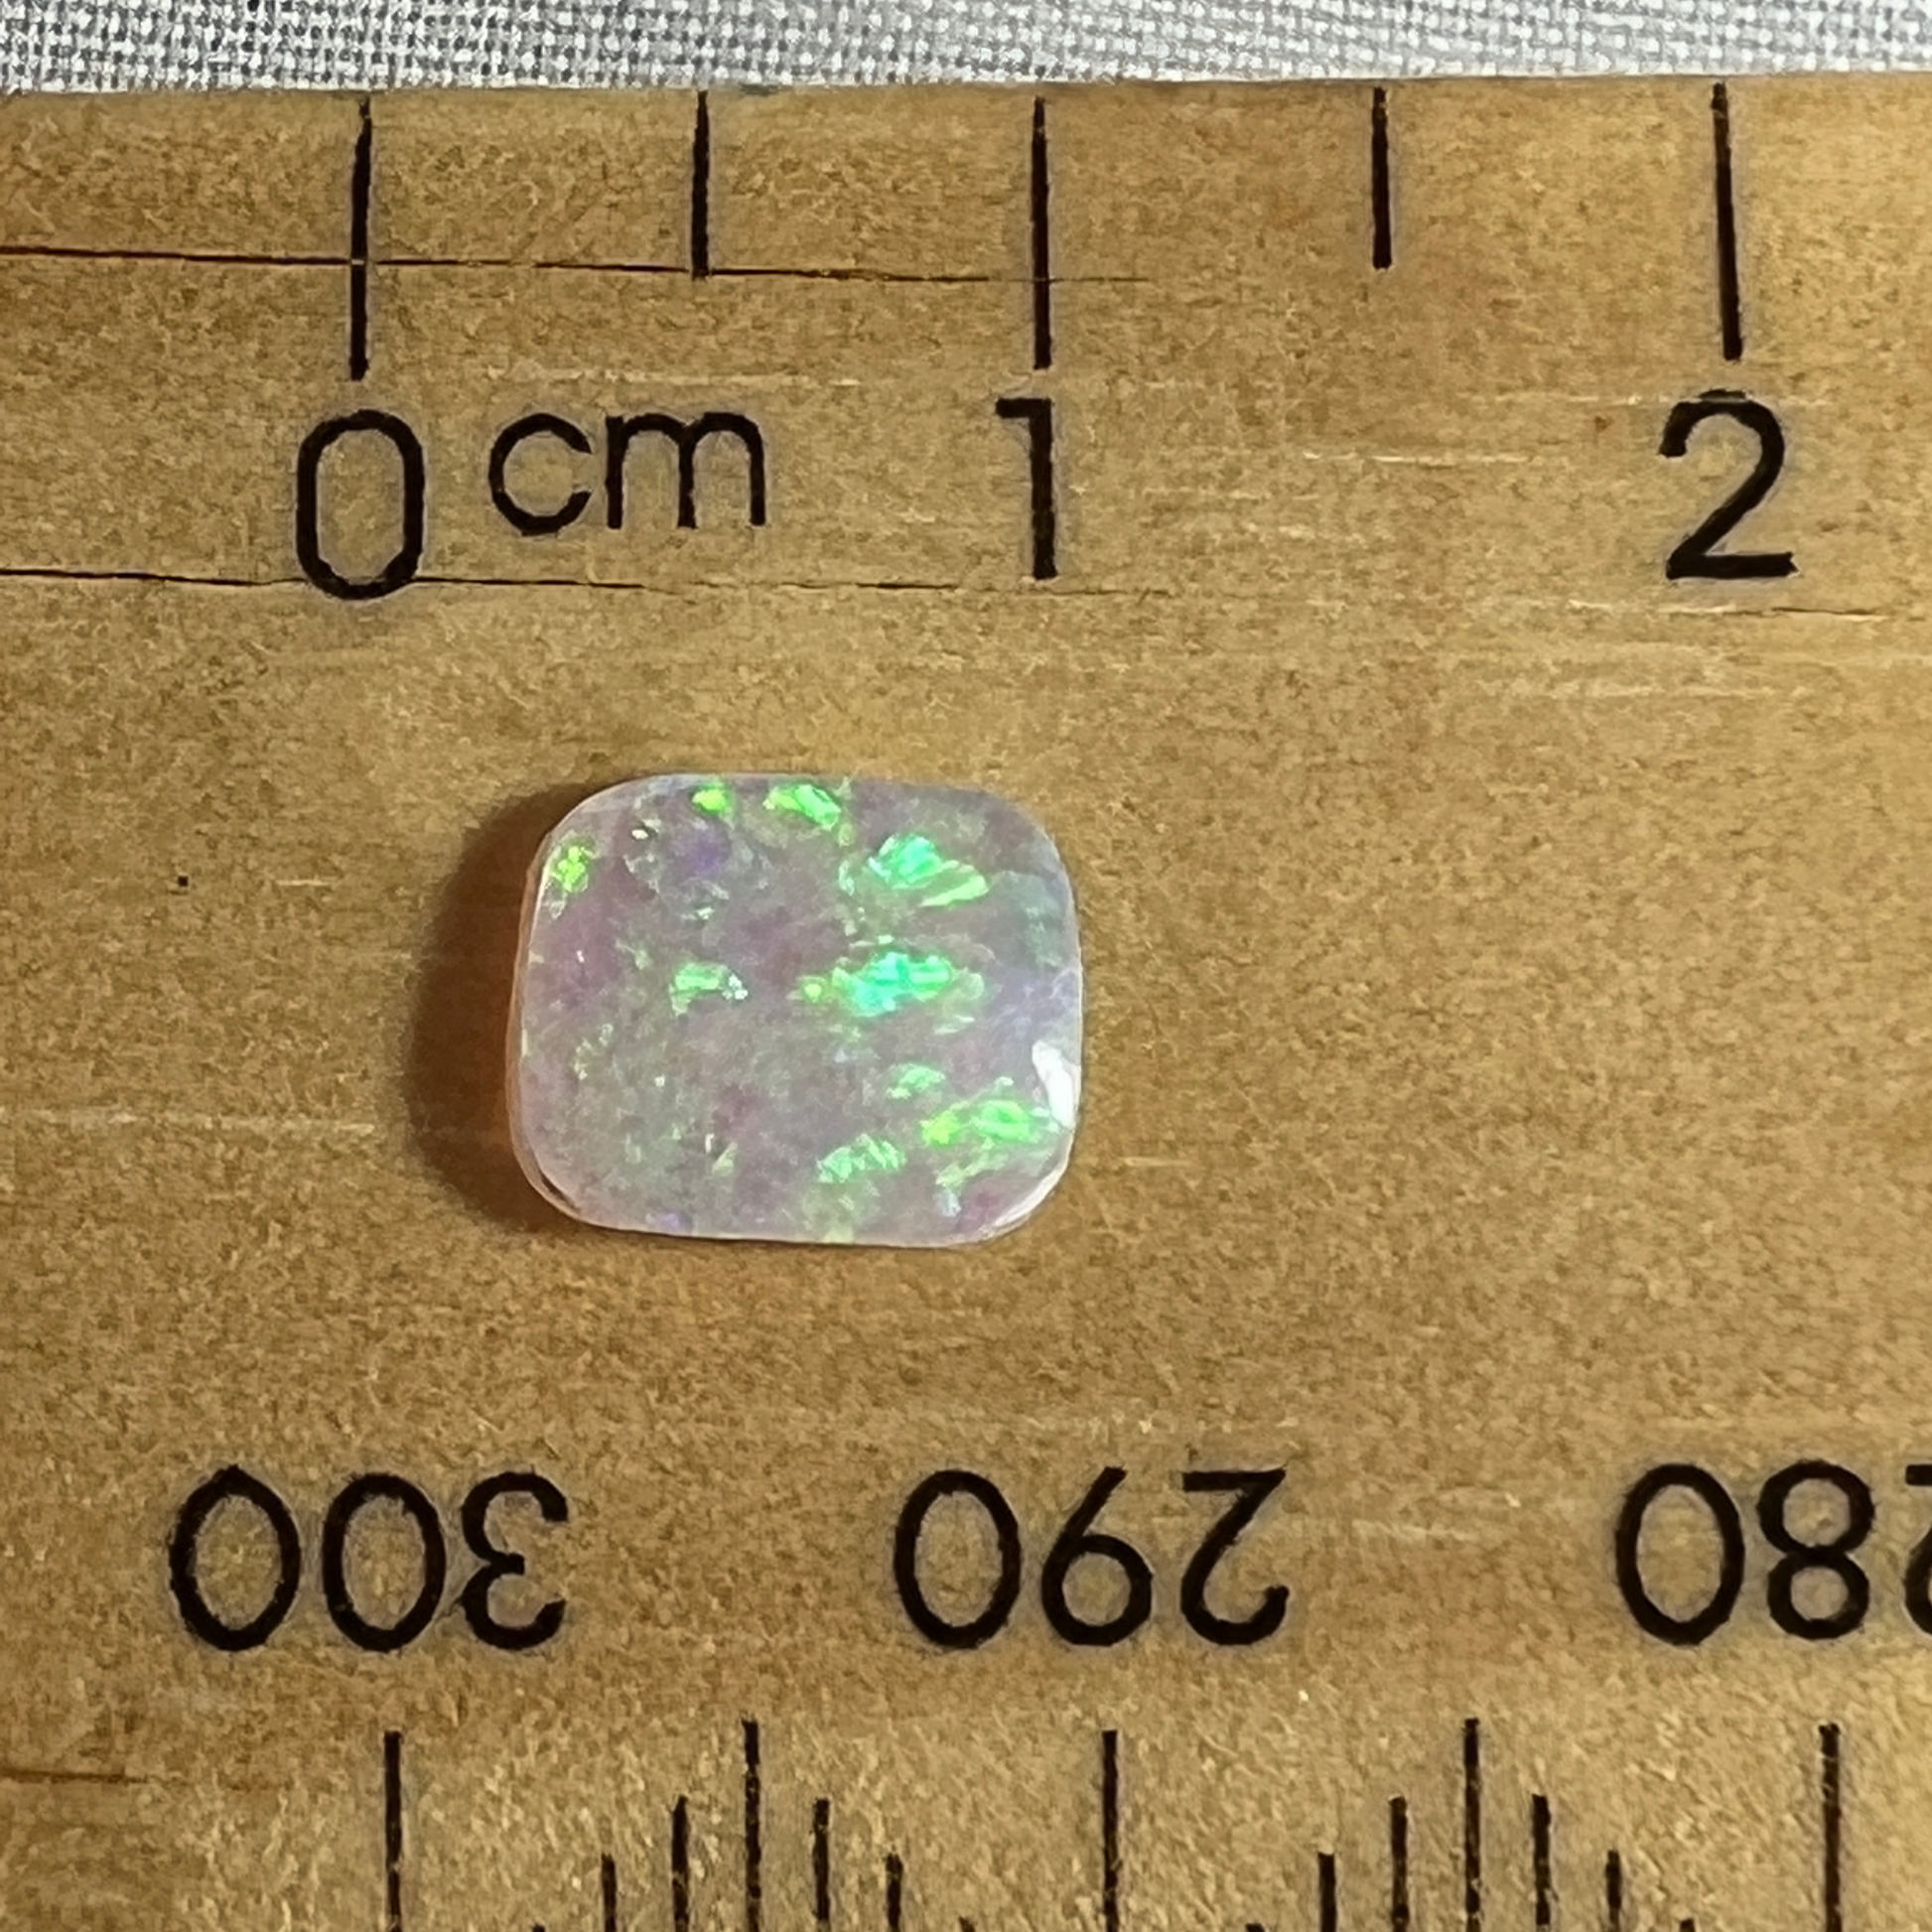 Lovely little Lightning Ridge crystal opal, cut just right for a ring.